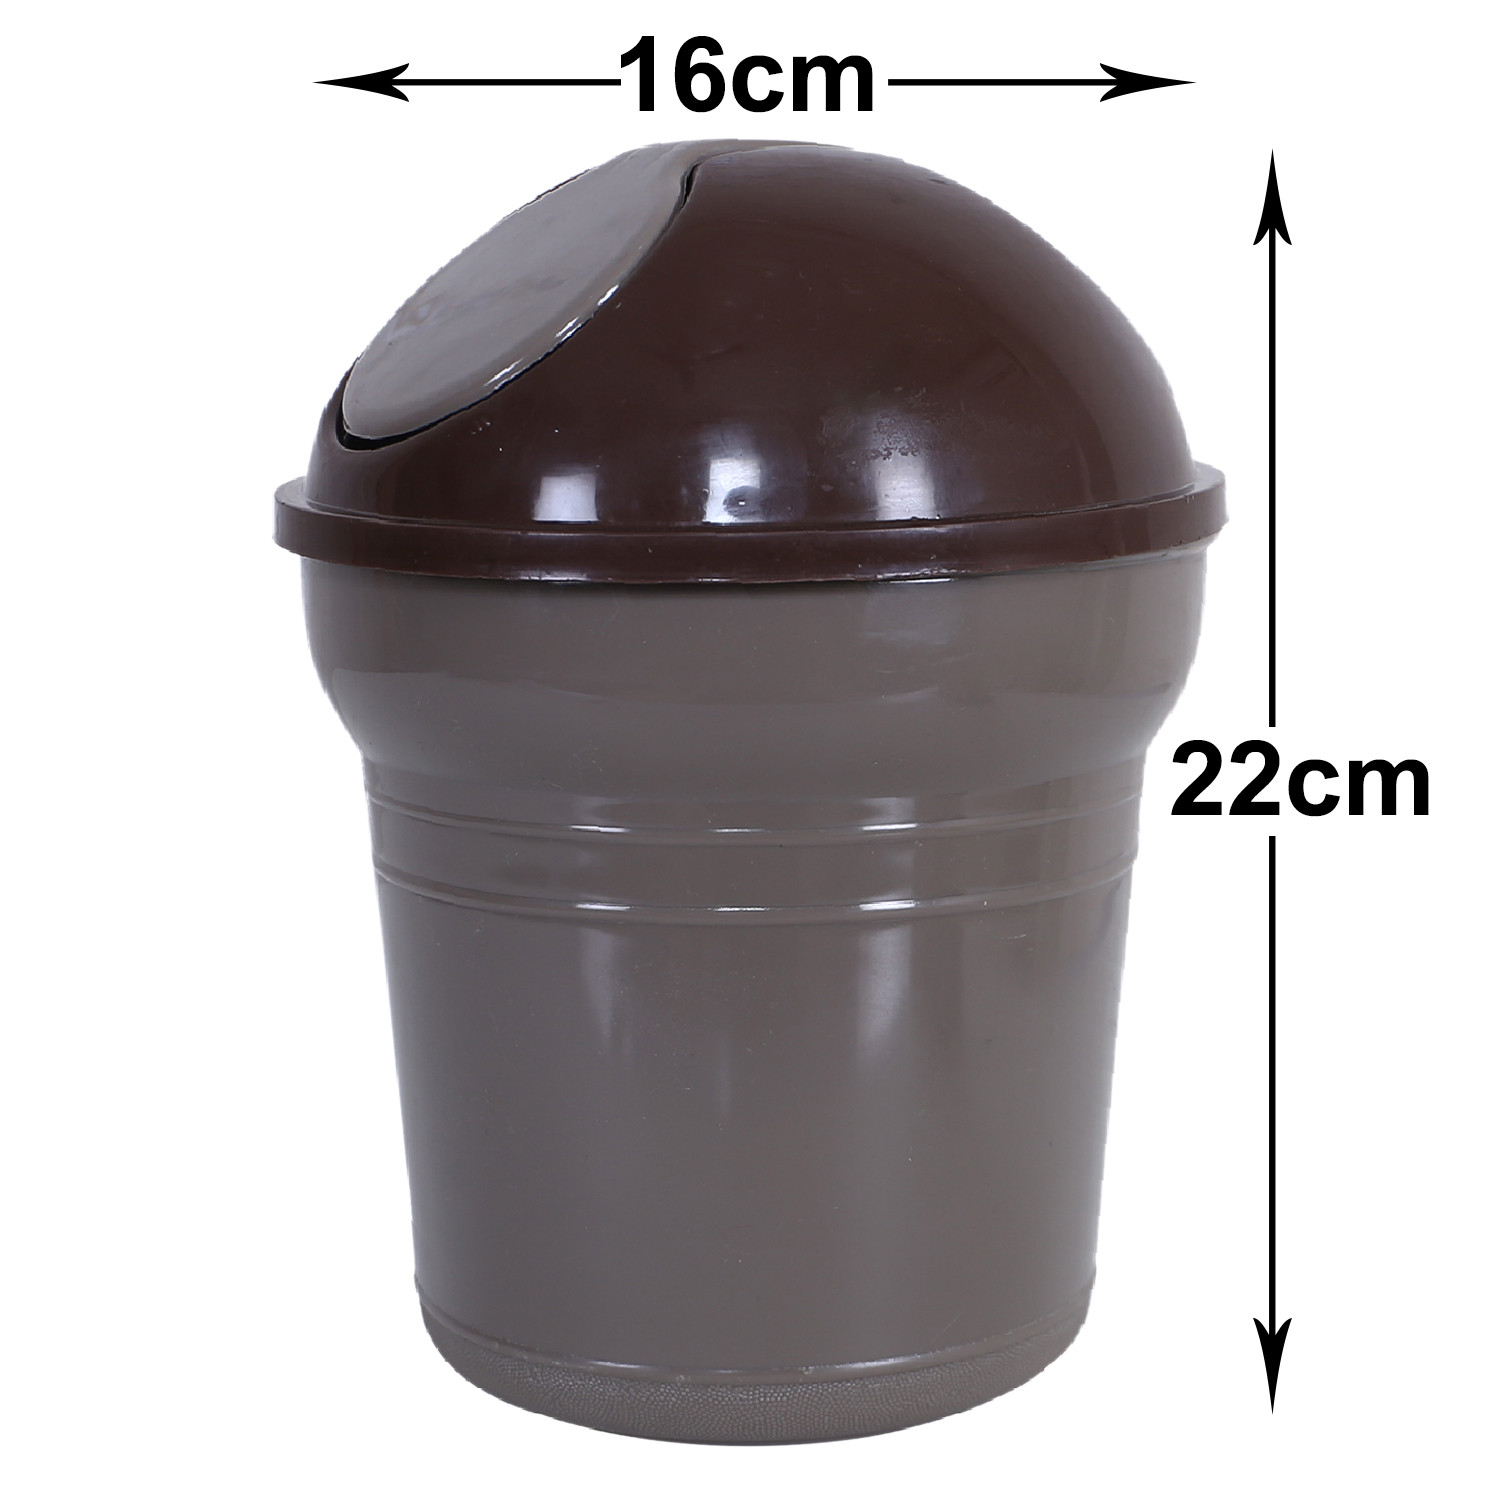 Kuber Industries Table Dustbin|Durable Plastic Small Desktop Garbage Bin with Swing-Lid|Countertop Trash Can For Study Table, Office, 3 Ltr, (Coffee)